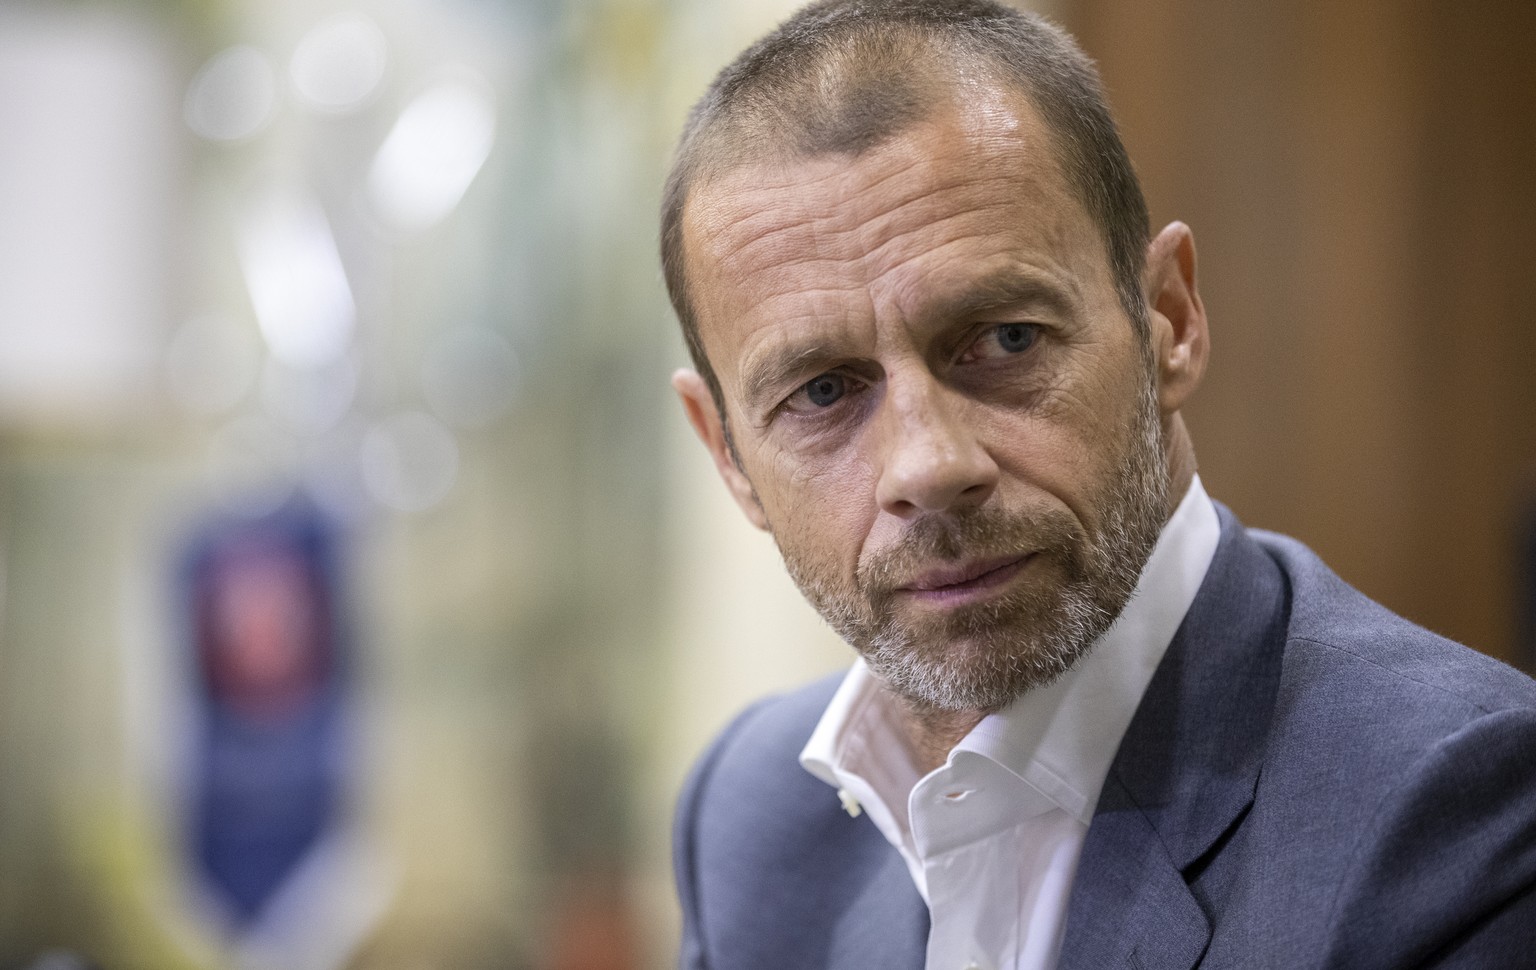 UEFA President Aleksander Ceferin during an interview with The Associated Press in Lisbon, Portugal, Sunday, Aug. 23, 2020. Ceferin says he will hold talks about retaining the single-game eliminator f ...